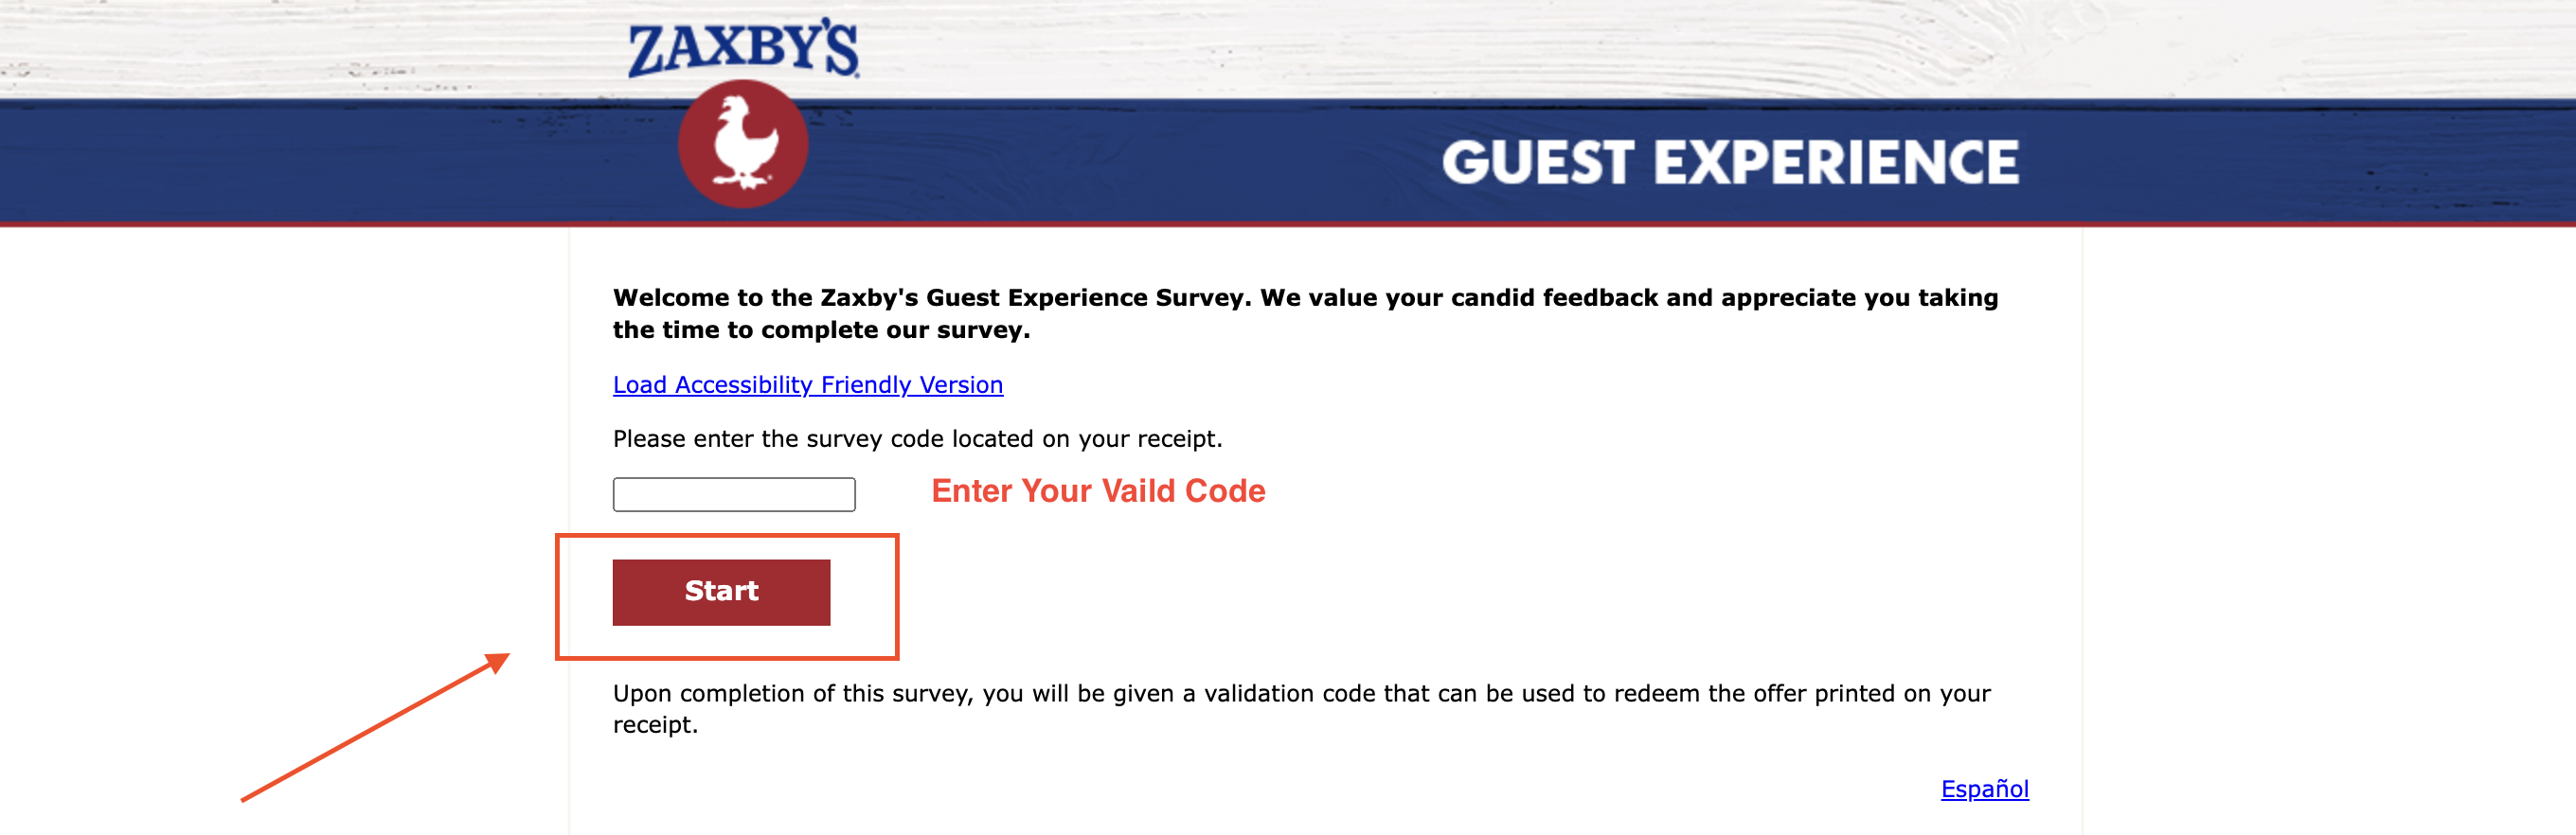 Zaxbyslistens Guest Experience Survey - Welcome